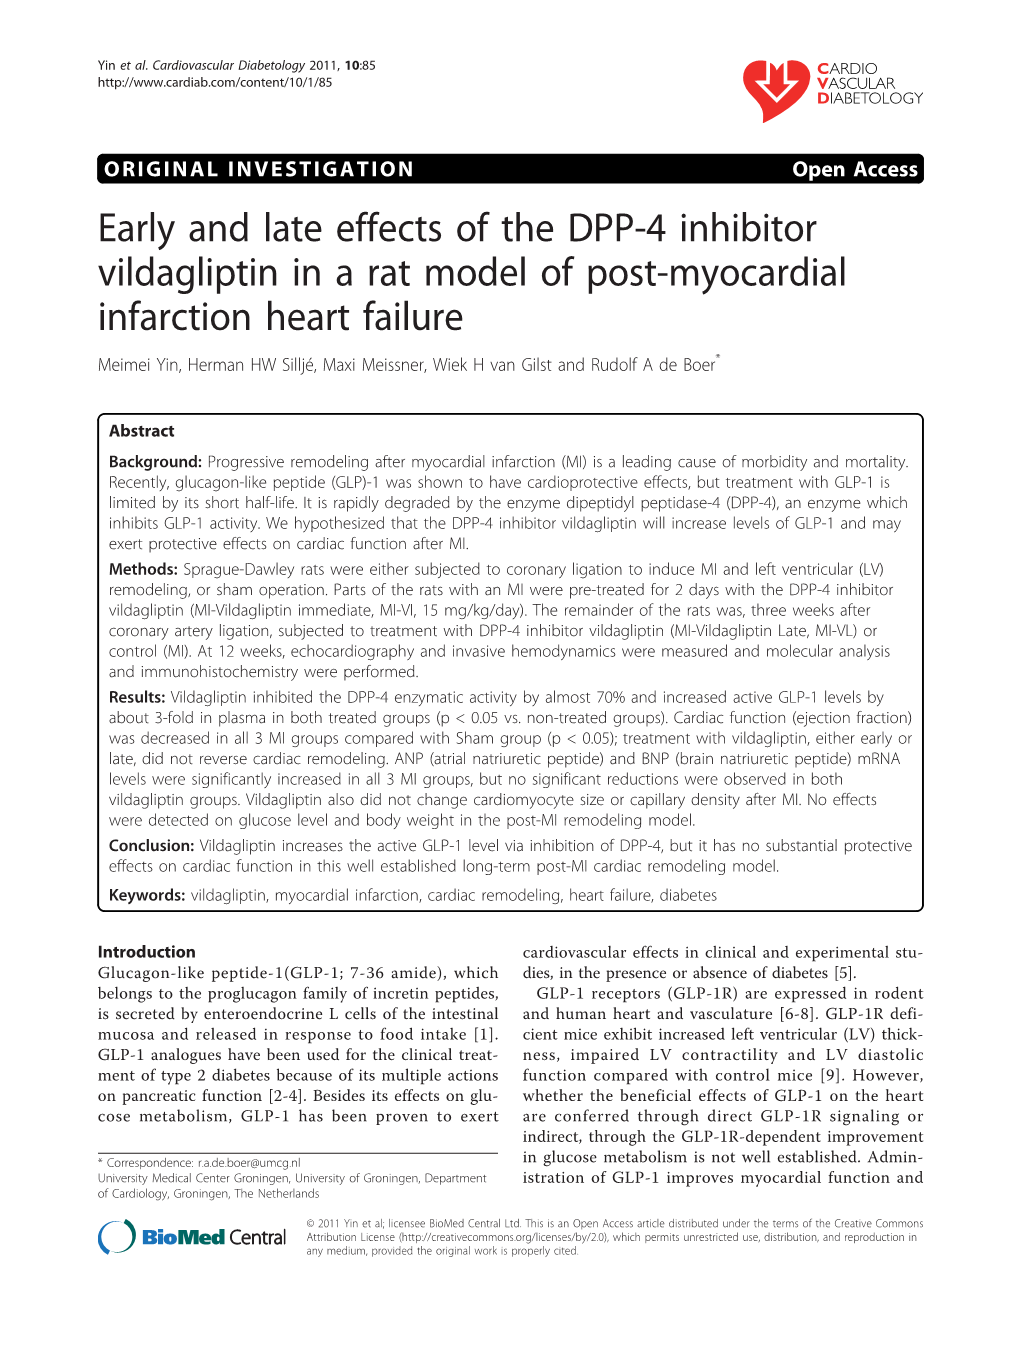 Early and Late Effects of the DPP-4 Inhibitor Vildagliptin in a Rat Model of Post-Myocardial Infarction Heart Failure